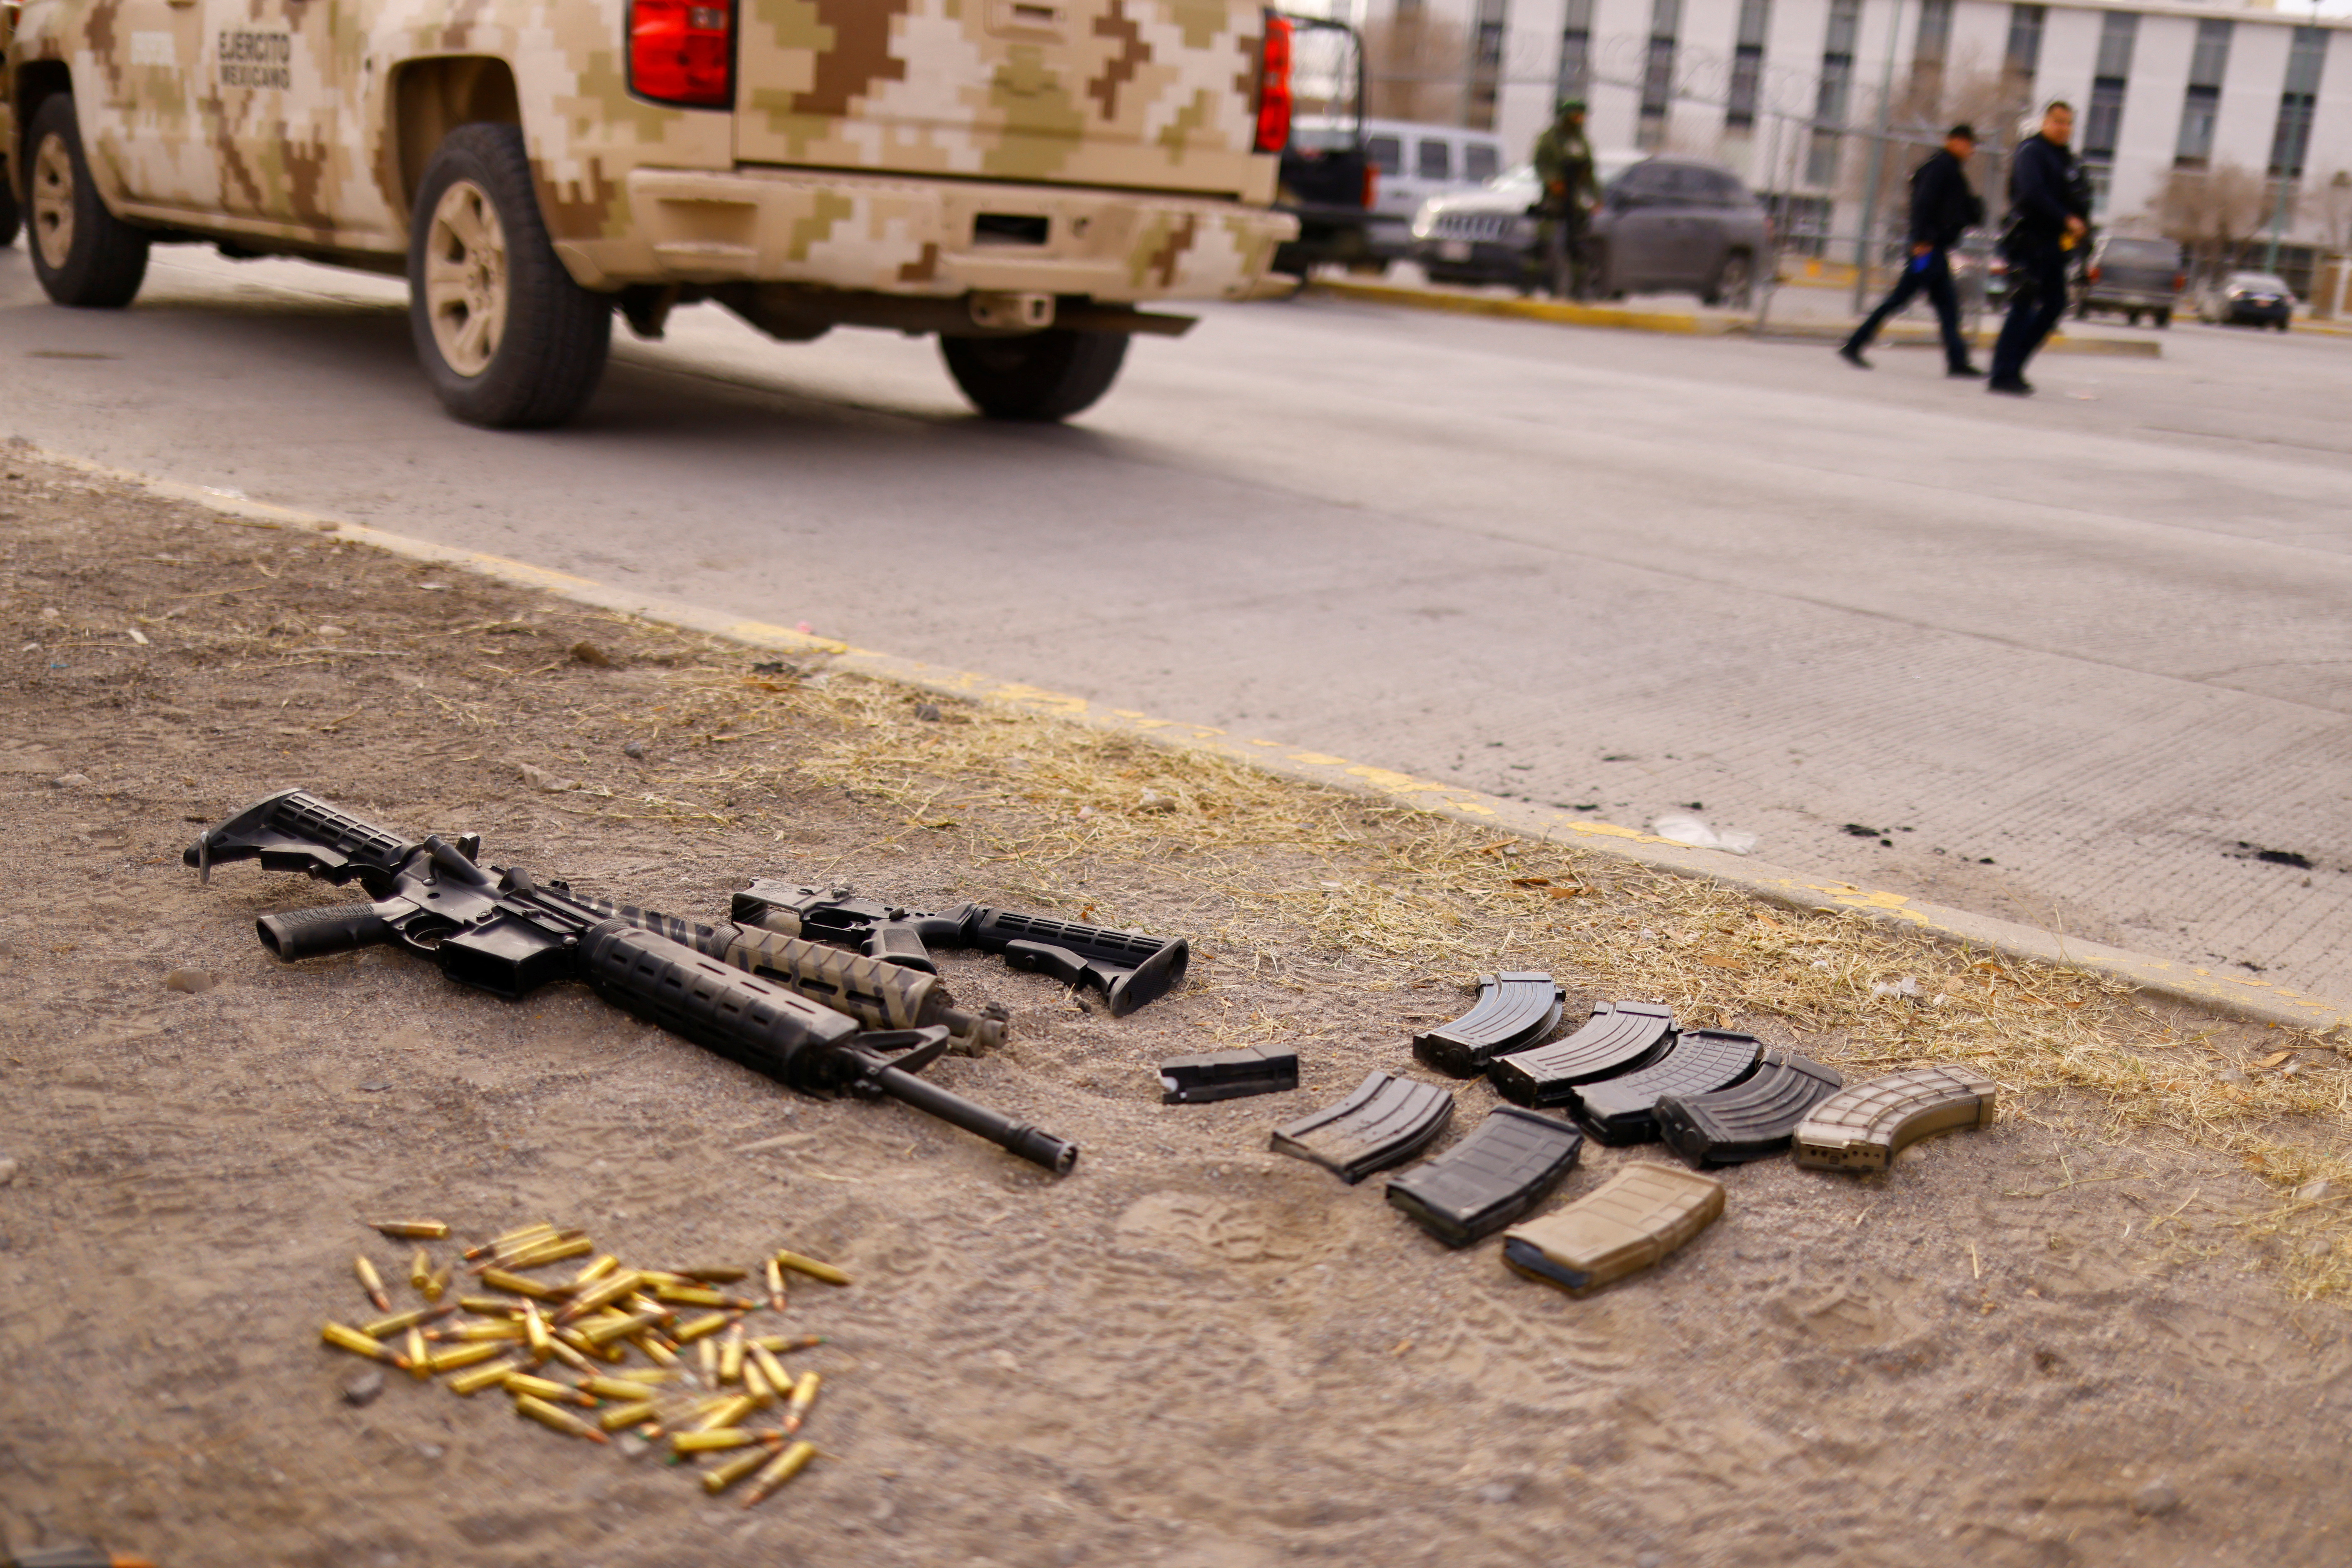 Guns and bullets are seen in front of the Cereso state prison number 3 secured by the security Forces after unknown assailants entered the prison and freed several inmates, resulting in injuries and deaths, in Ciudad Juarez